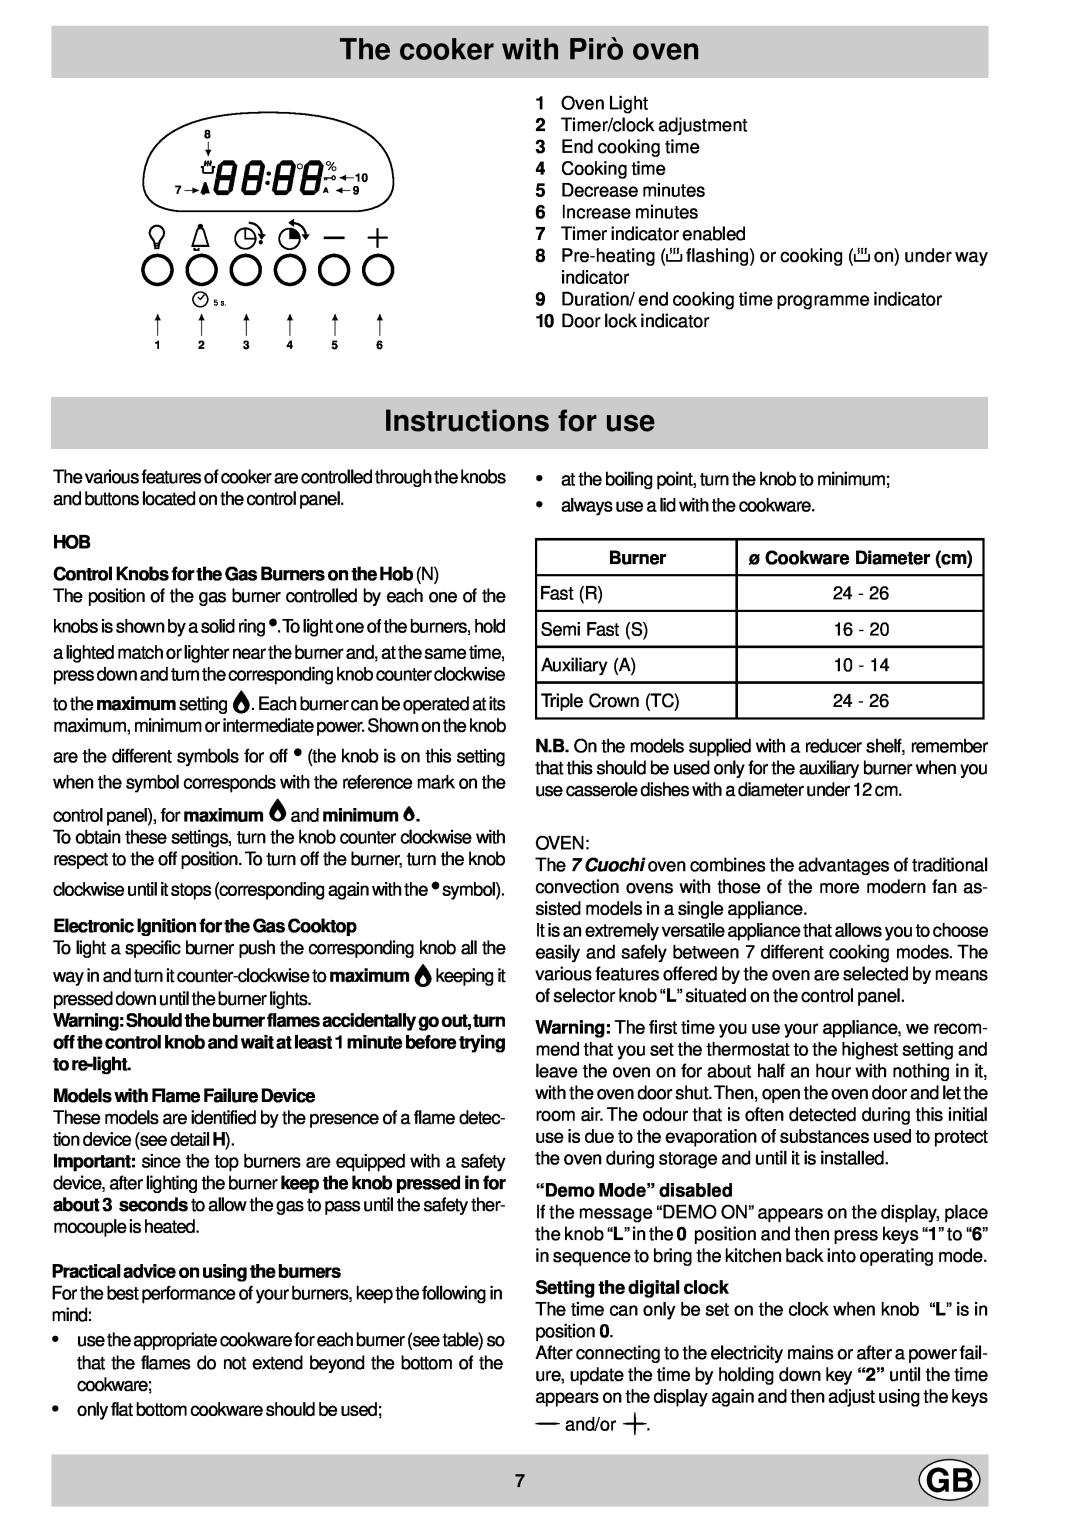 Hotpoint EG600P manual Instructions for use, The cooker with Pirò oven, HOB Control Knobs for the Gas Burners on the Hob N 